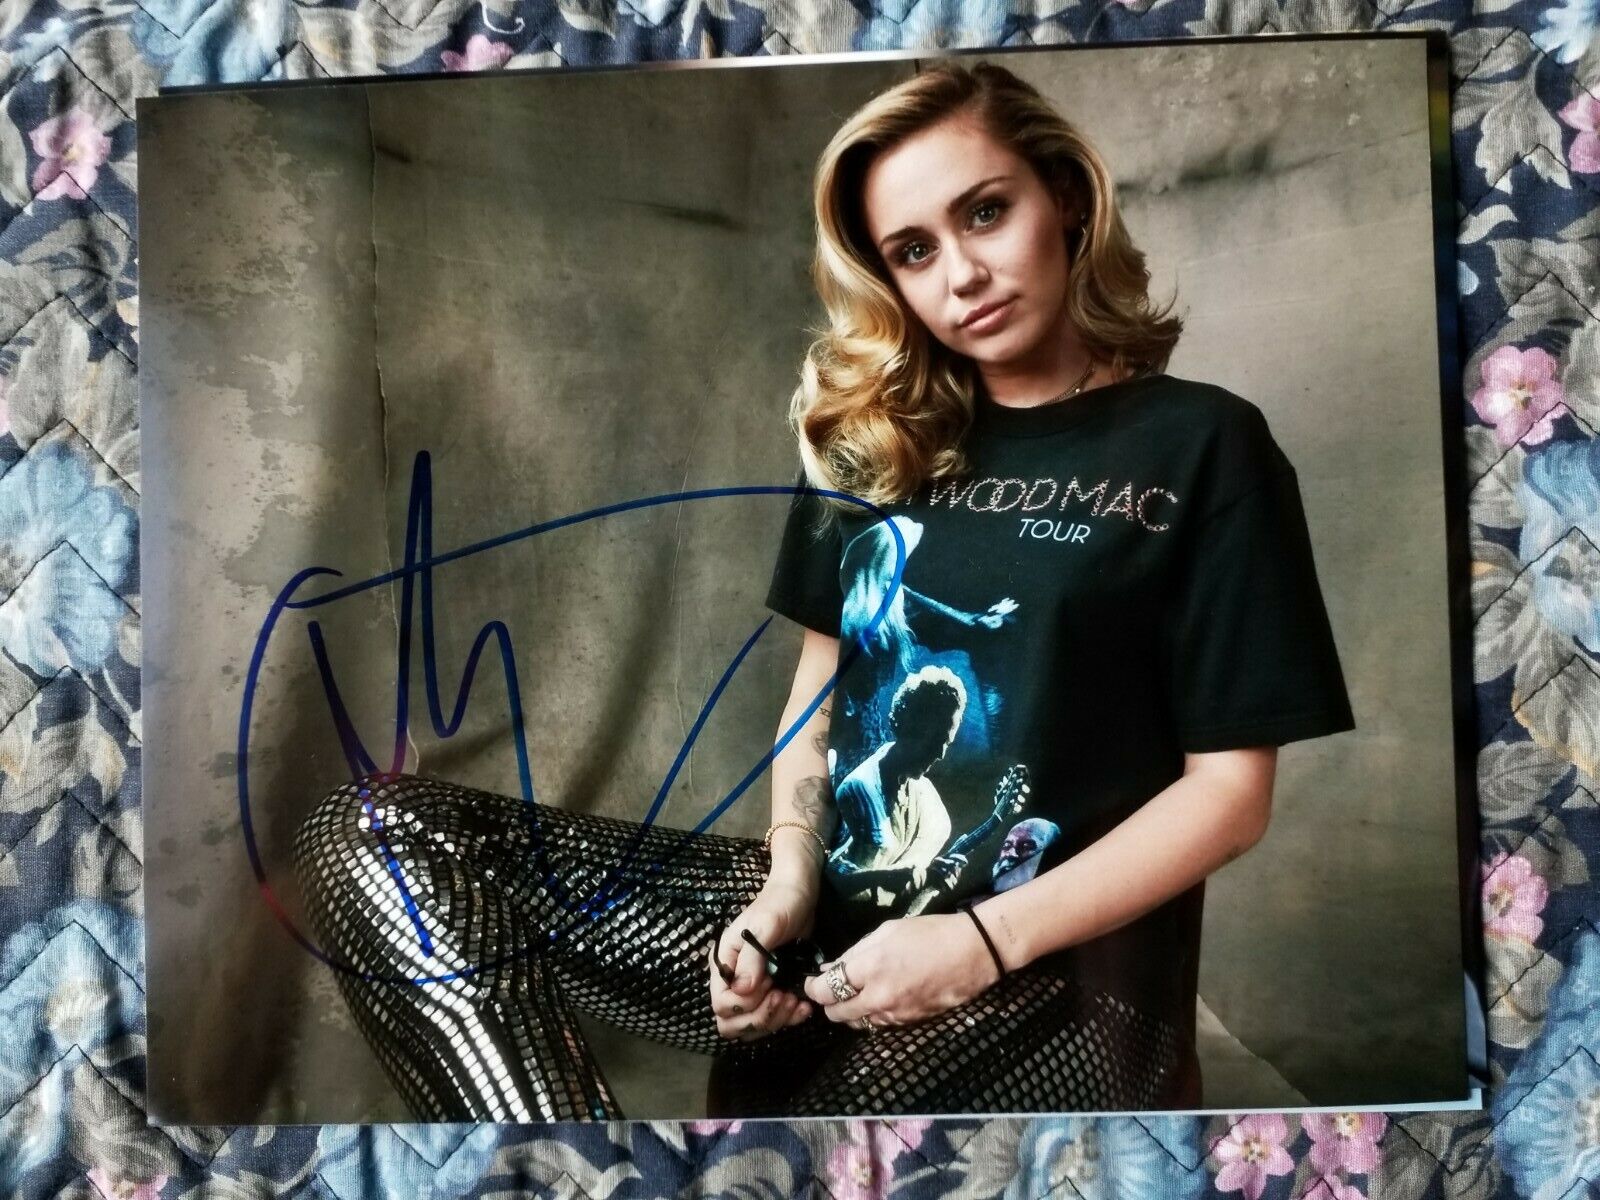 Singer Miley Cyrus Authentic Signed Autographed 8x10 Photo Poster painting